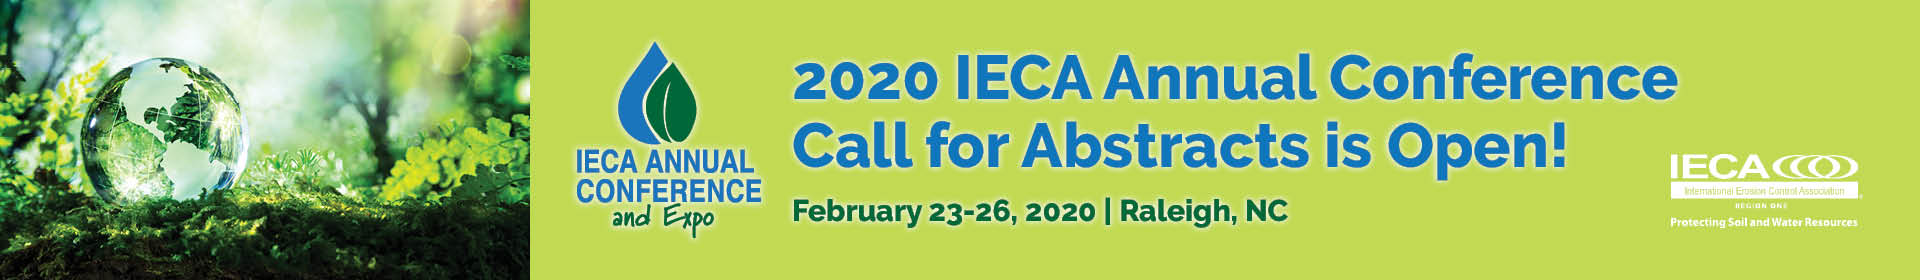 2020 IECA Annual Conference & Expo Event Banner